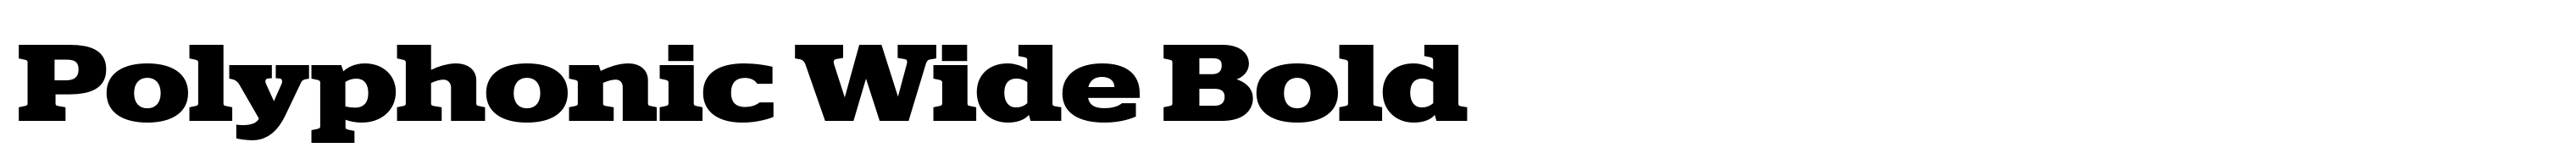 Polyphonic Wide Bold